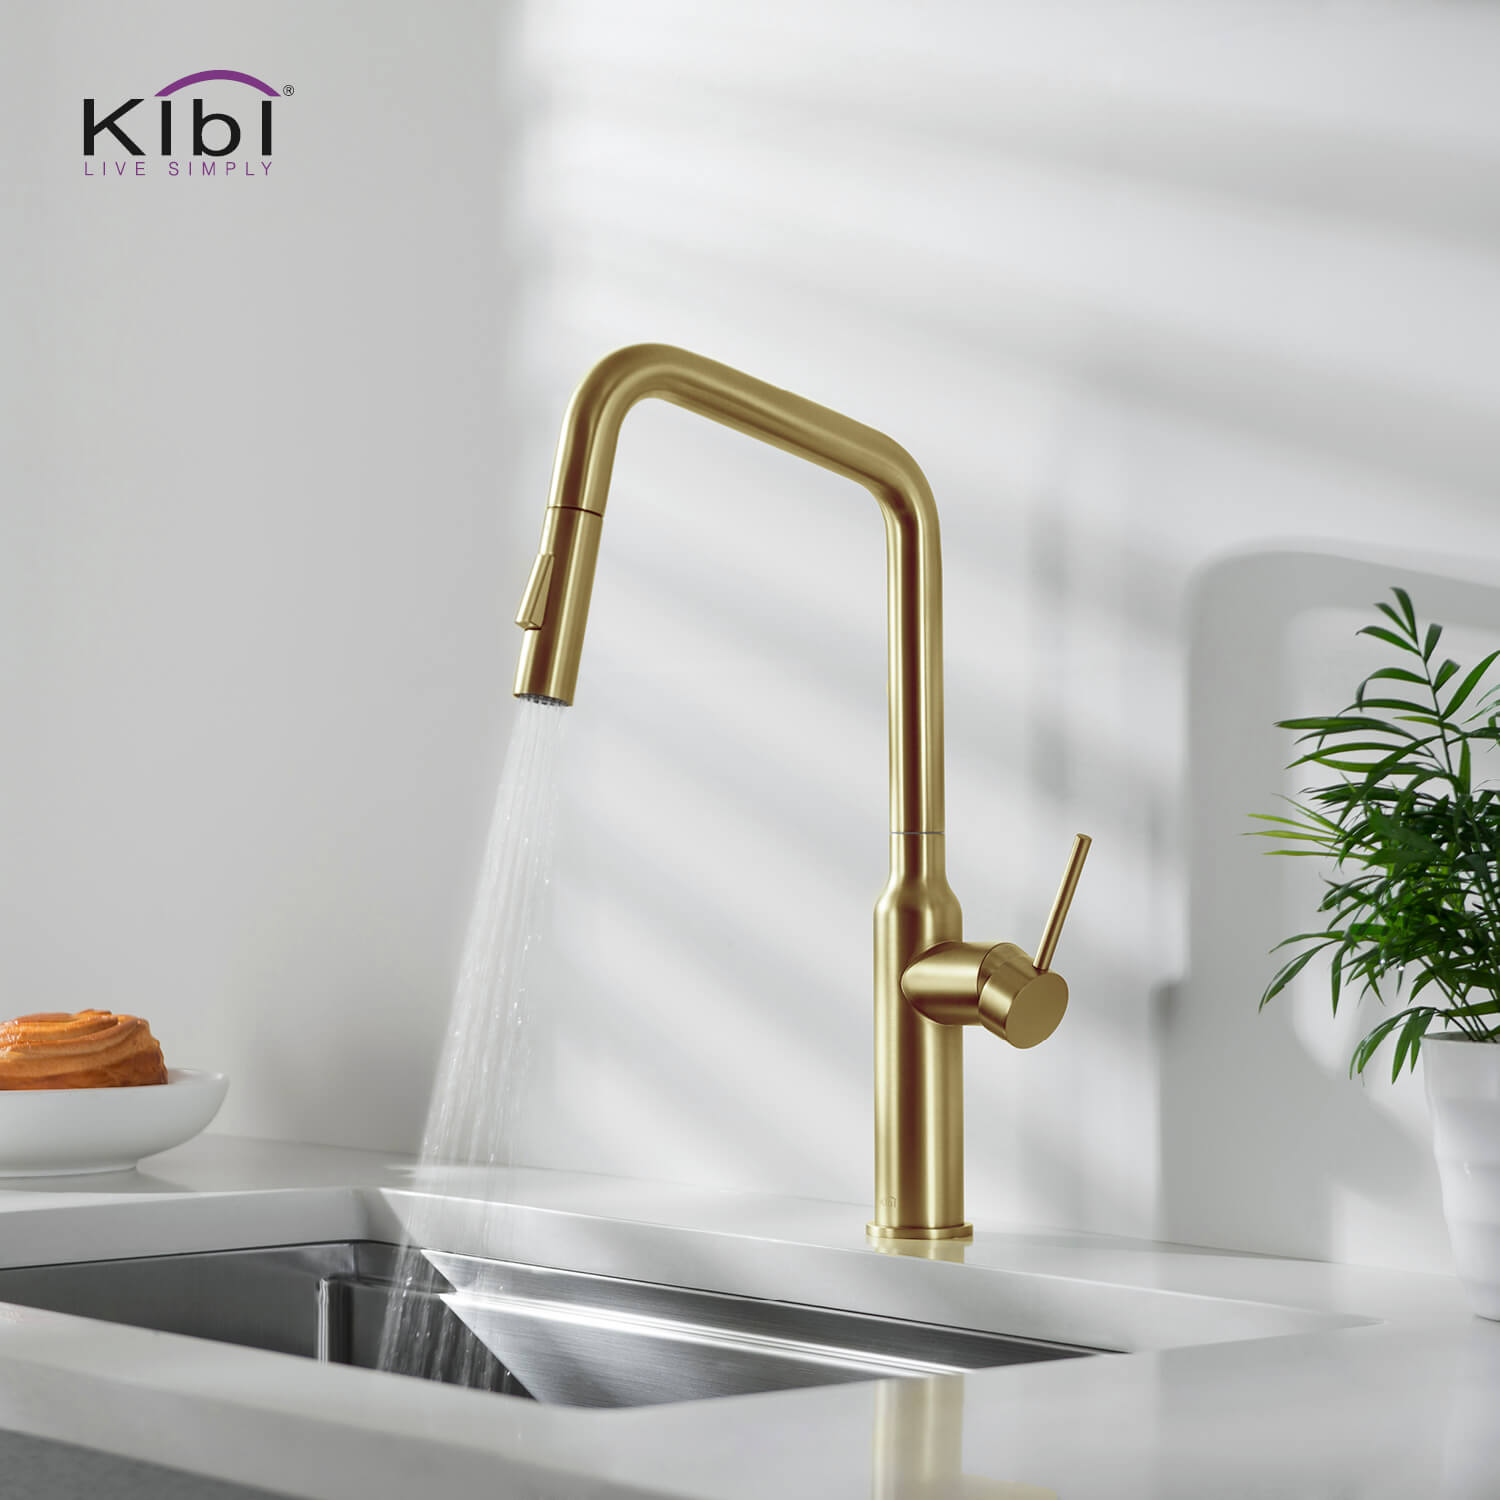 Kibi Macon Single Handle High Arc Pull Down Kitchen Faucet in Brushed Gold Finish